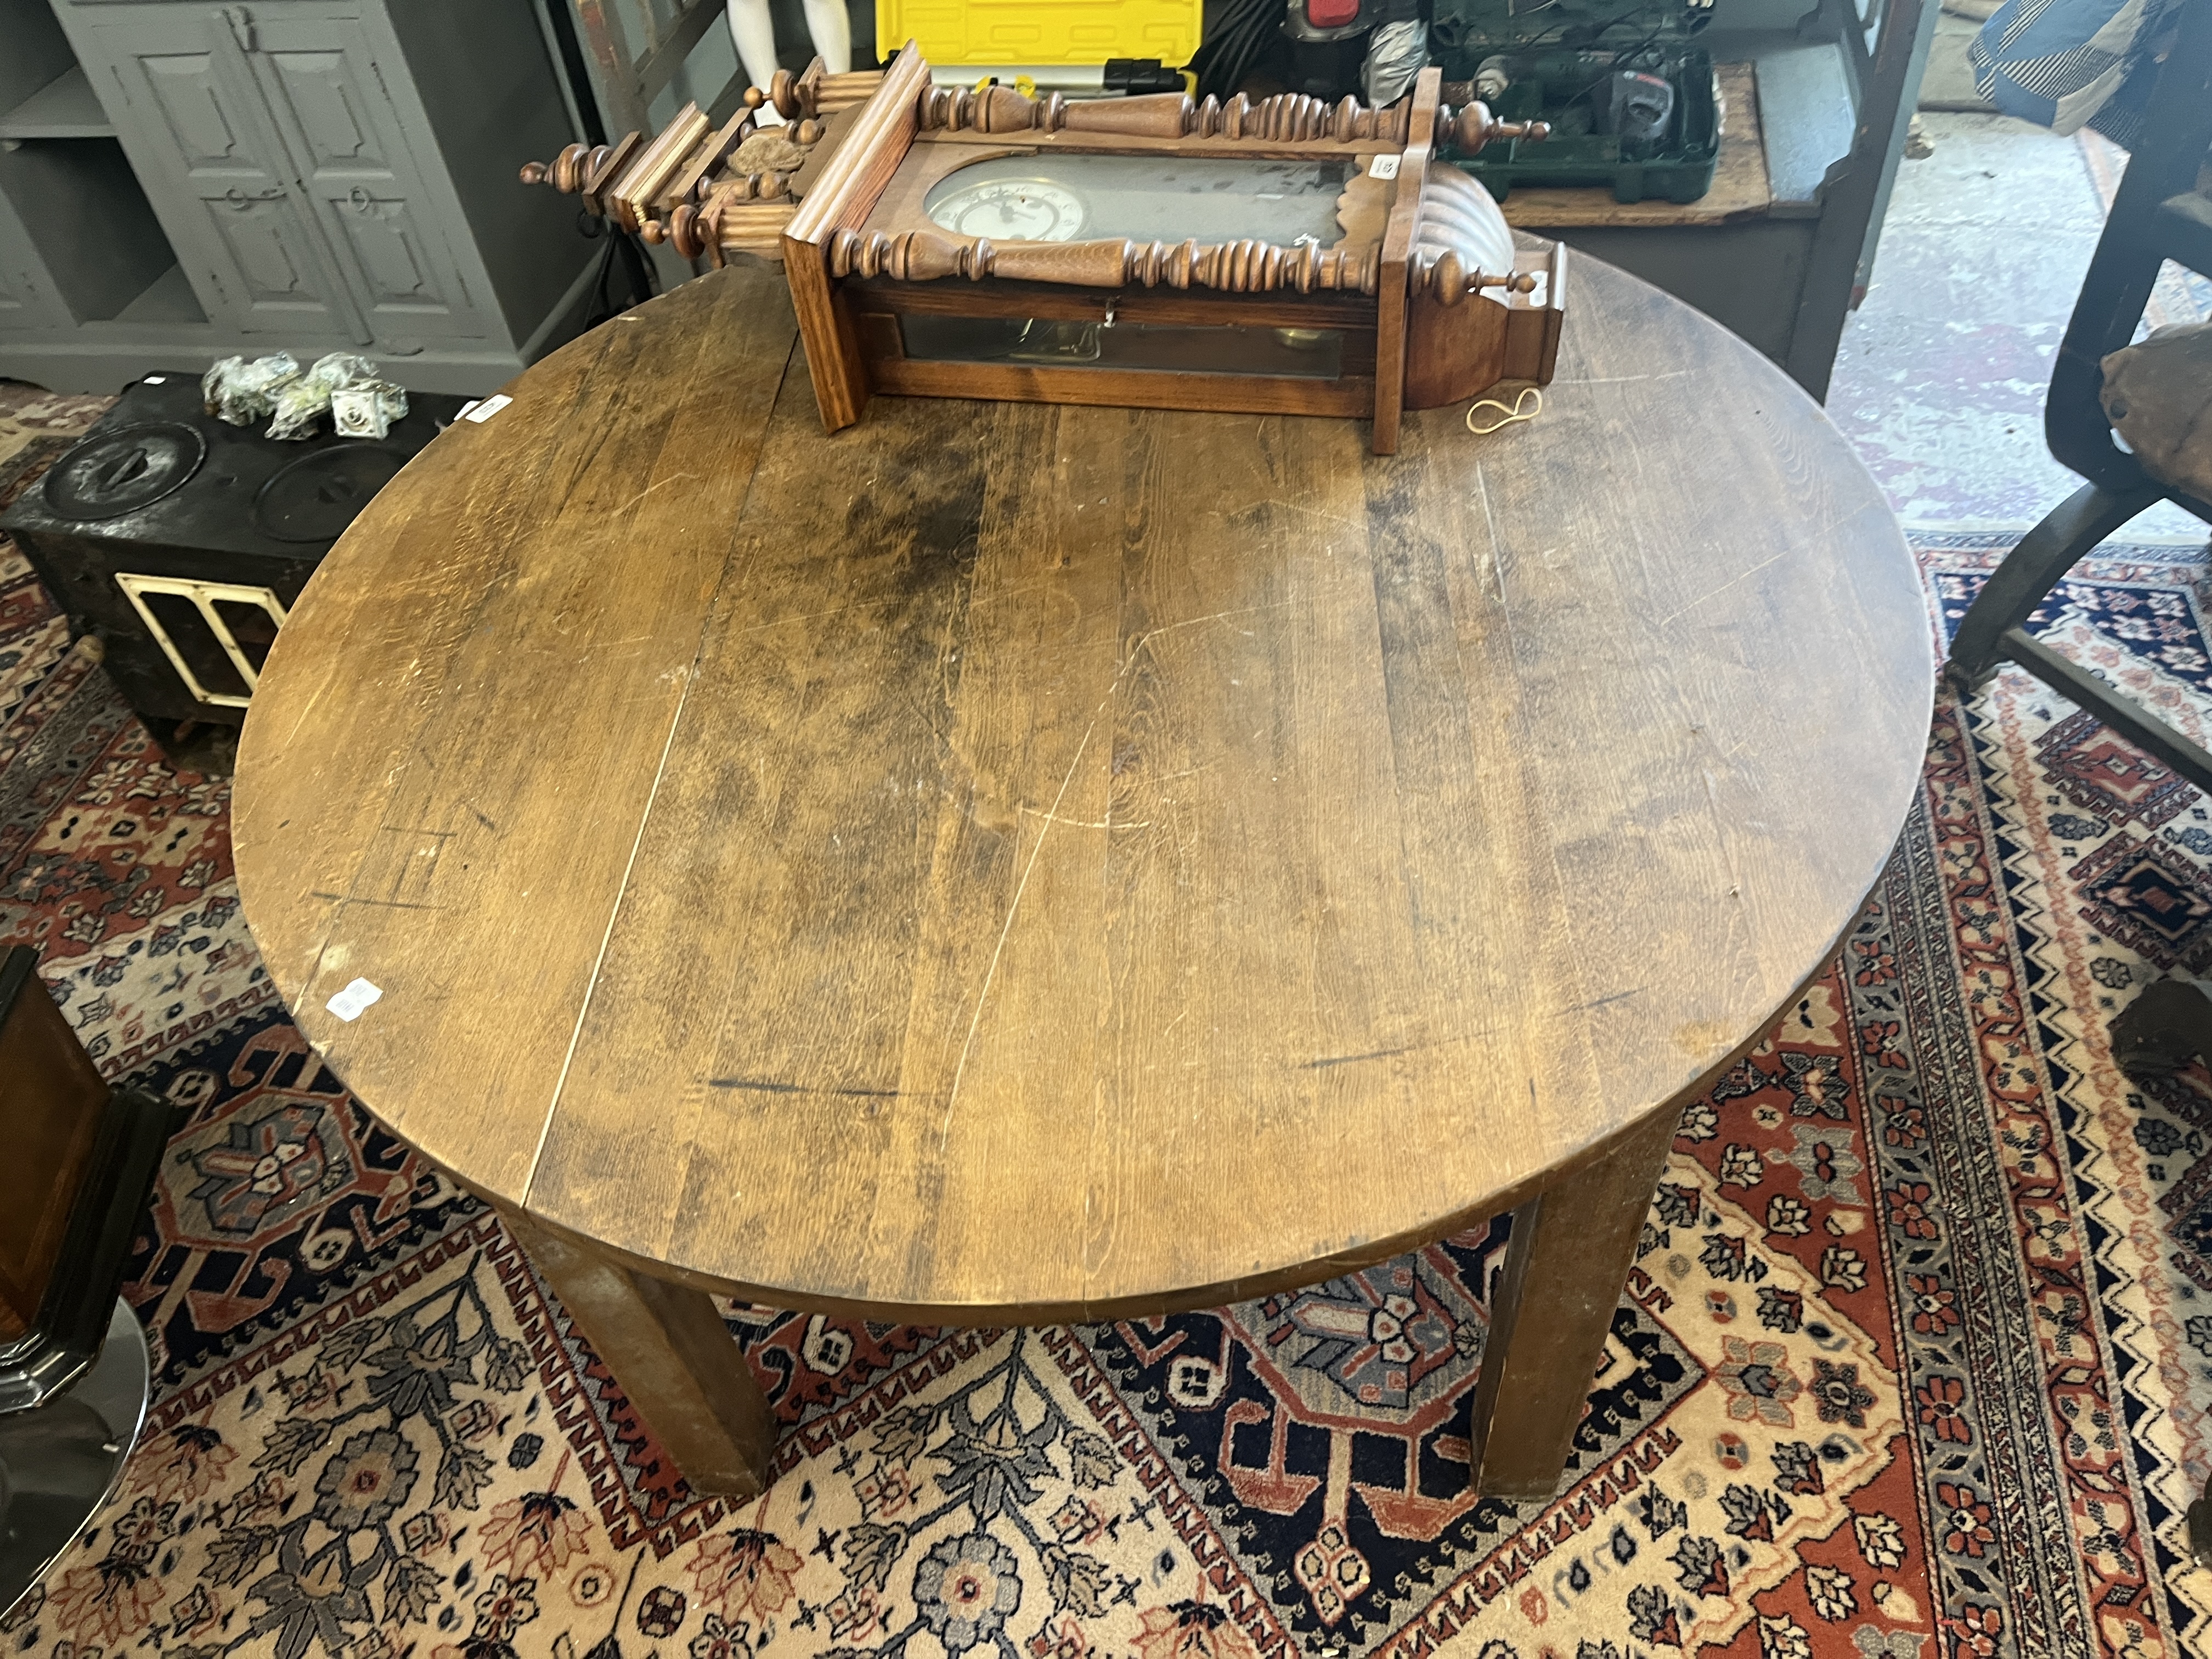 Circular dining table - Image 2 of 3